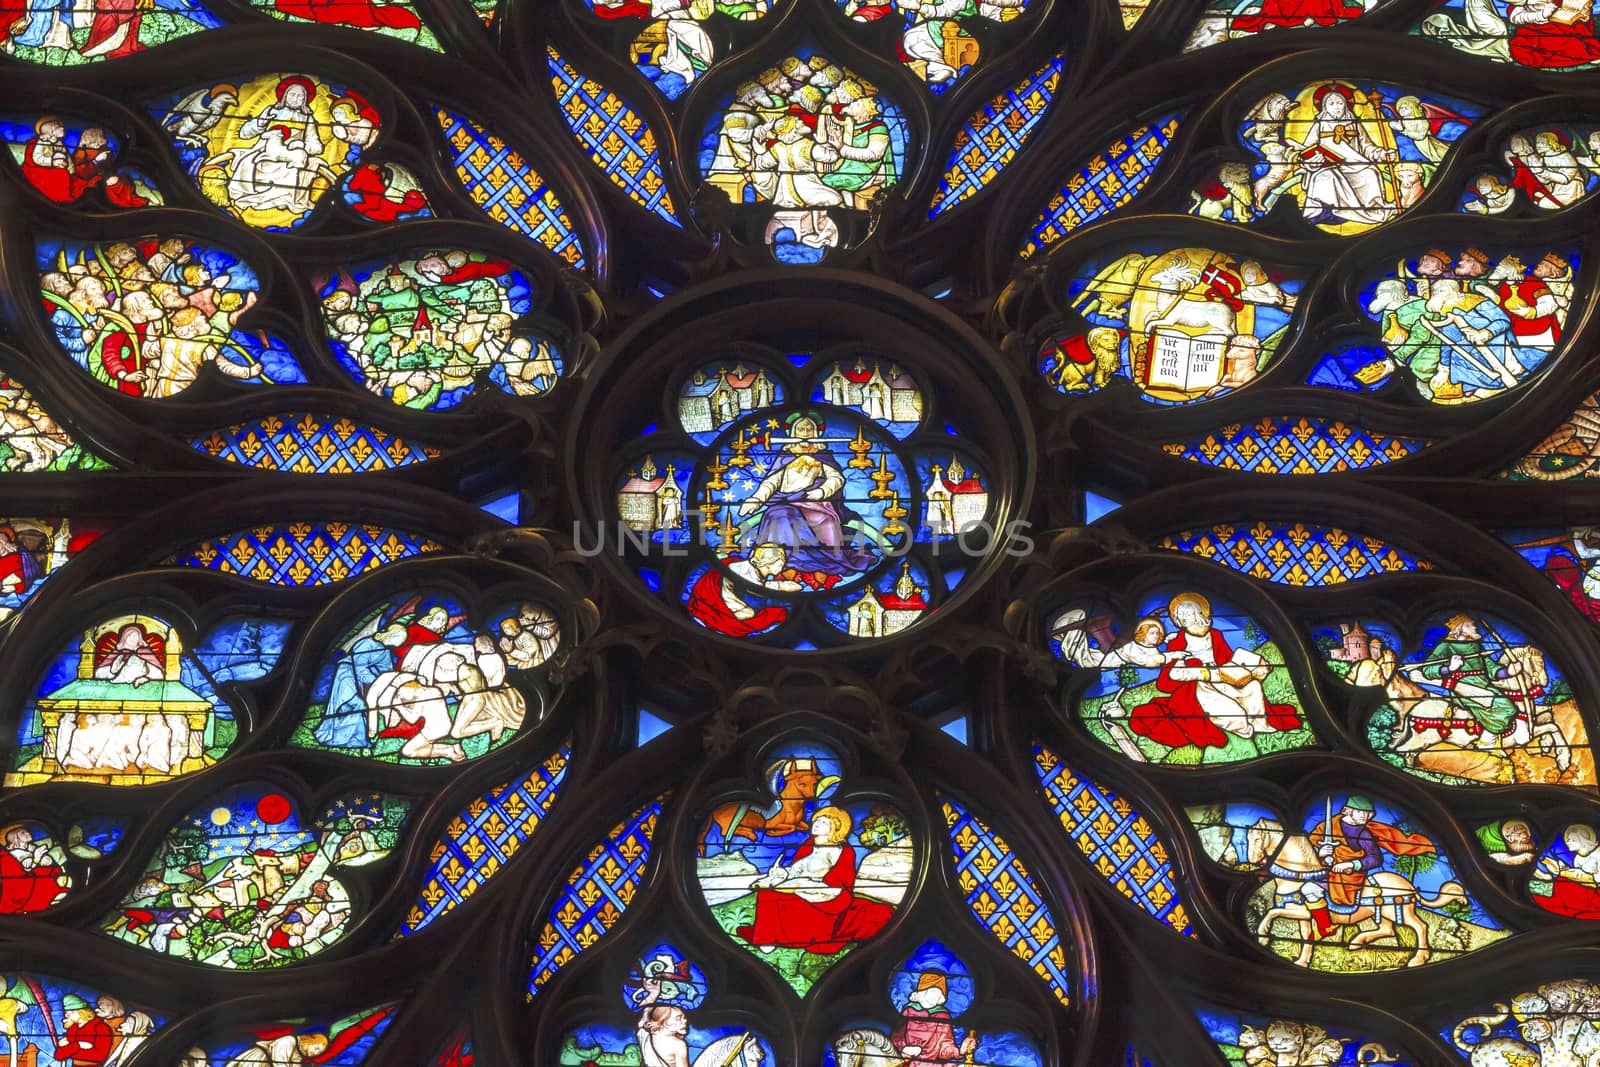 Jesus Christ With Sword Biblical and Medieval Stories Rose Window Stained Glass Saint Chapelle Paris France.  Saint King Louis 9th created Sainte Chappel in 1248 to house Christian relics, including Christ's Crown of Thorns.  Stained Glass created in the 13th Century and shows various biblical stories along wtih stories from 1200s.